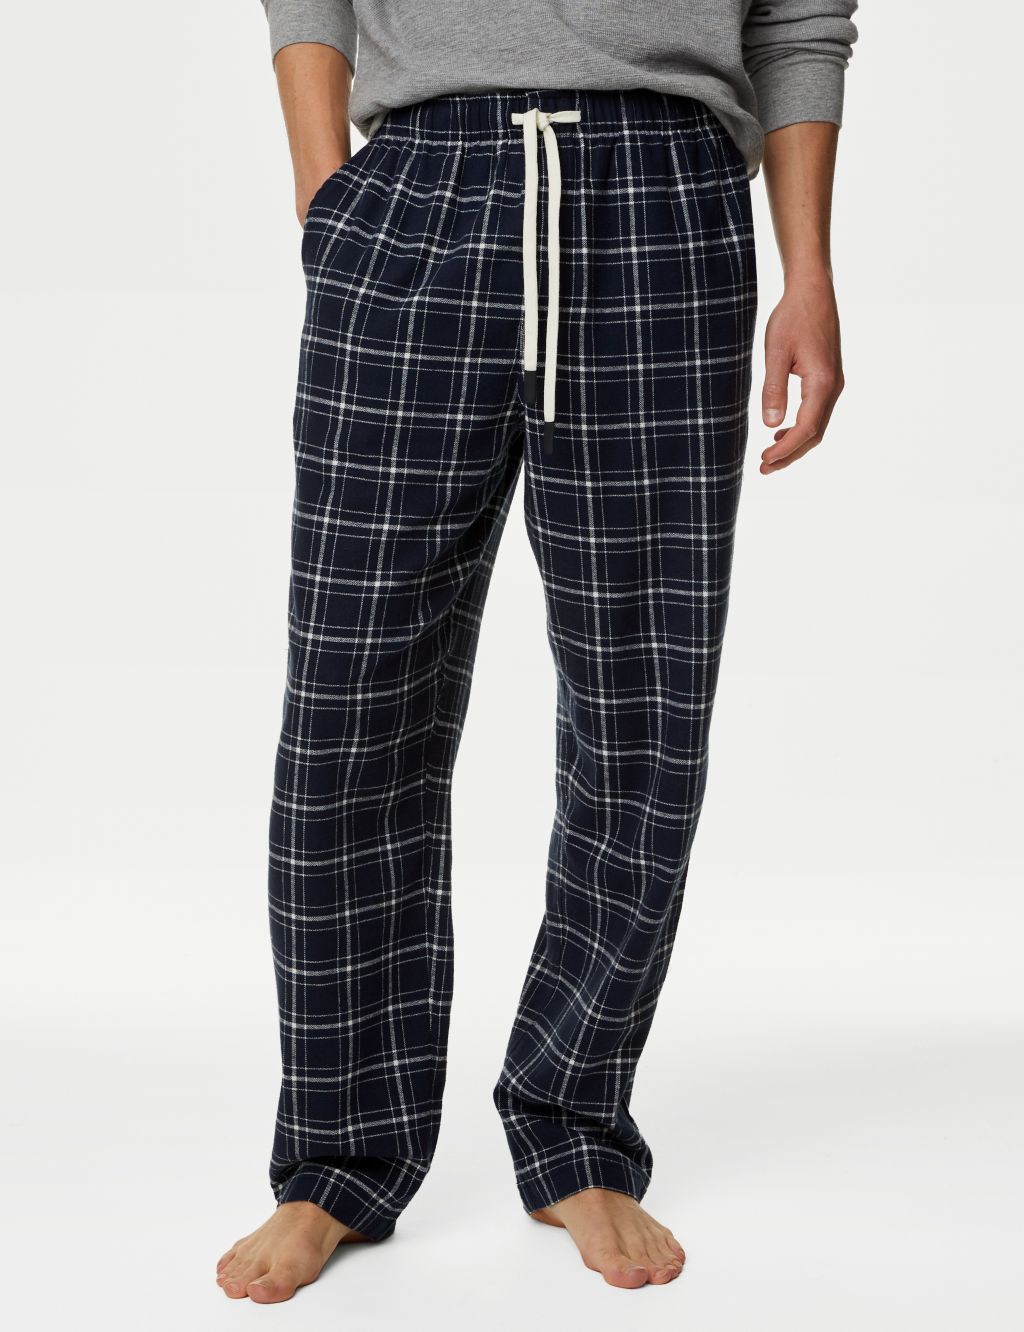 Brushed Cotton Checked Loungewear Bottoms image 3